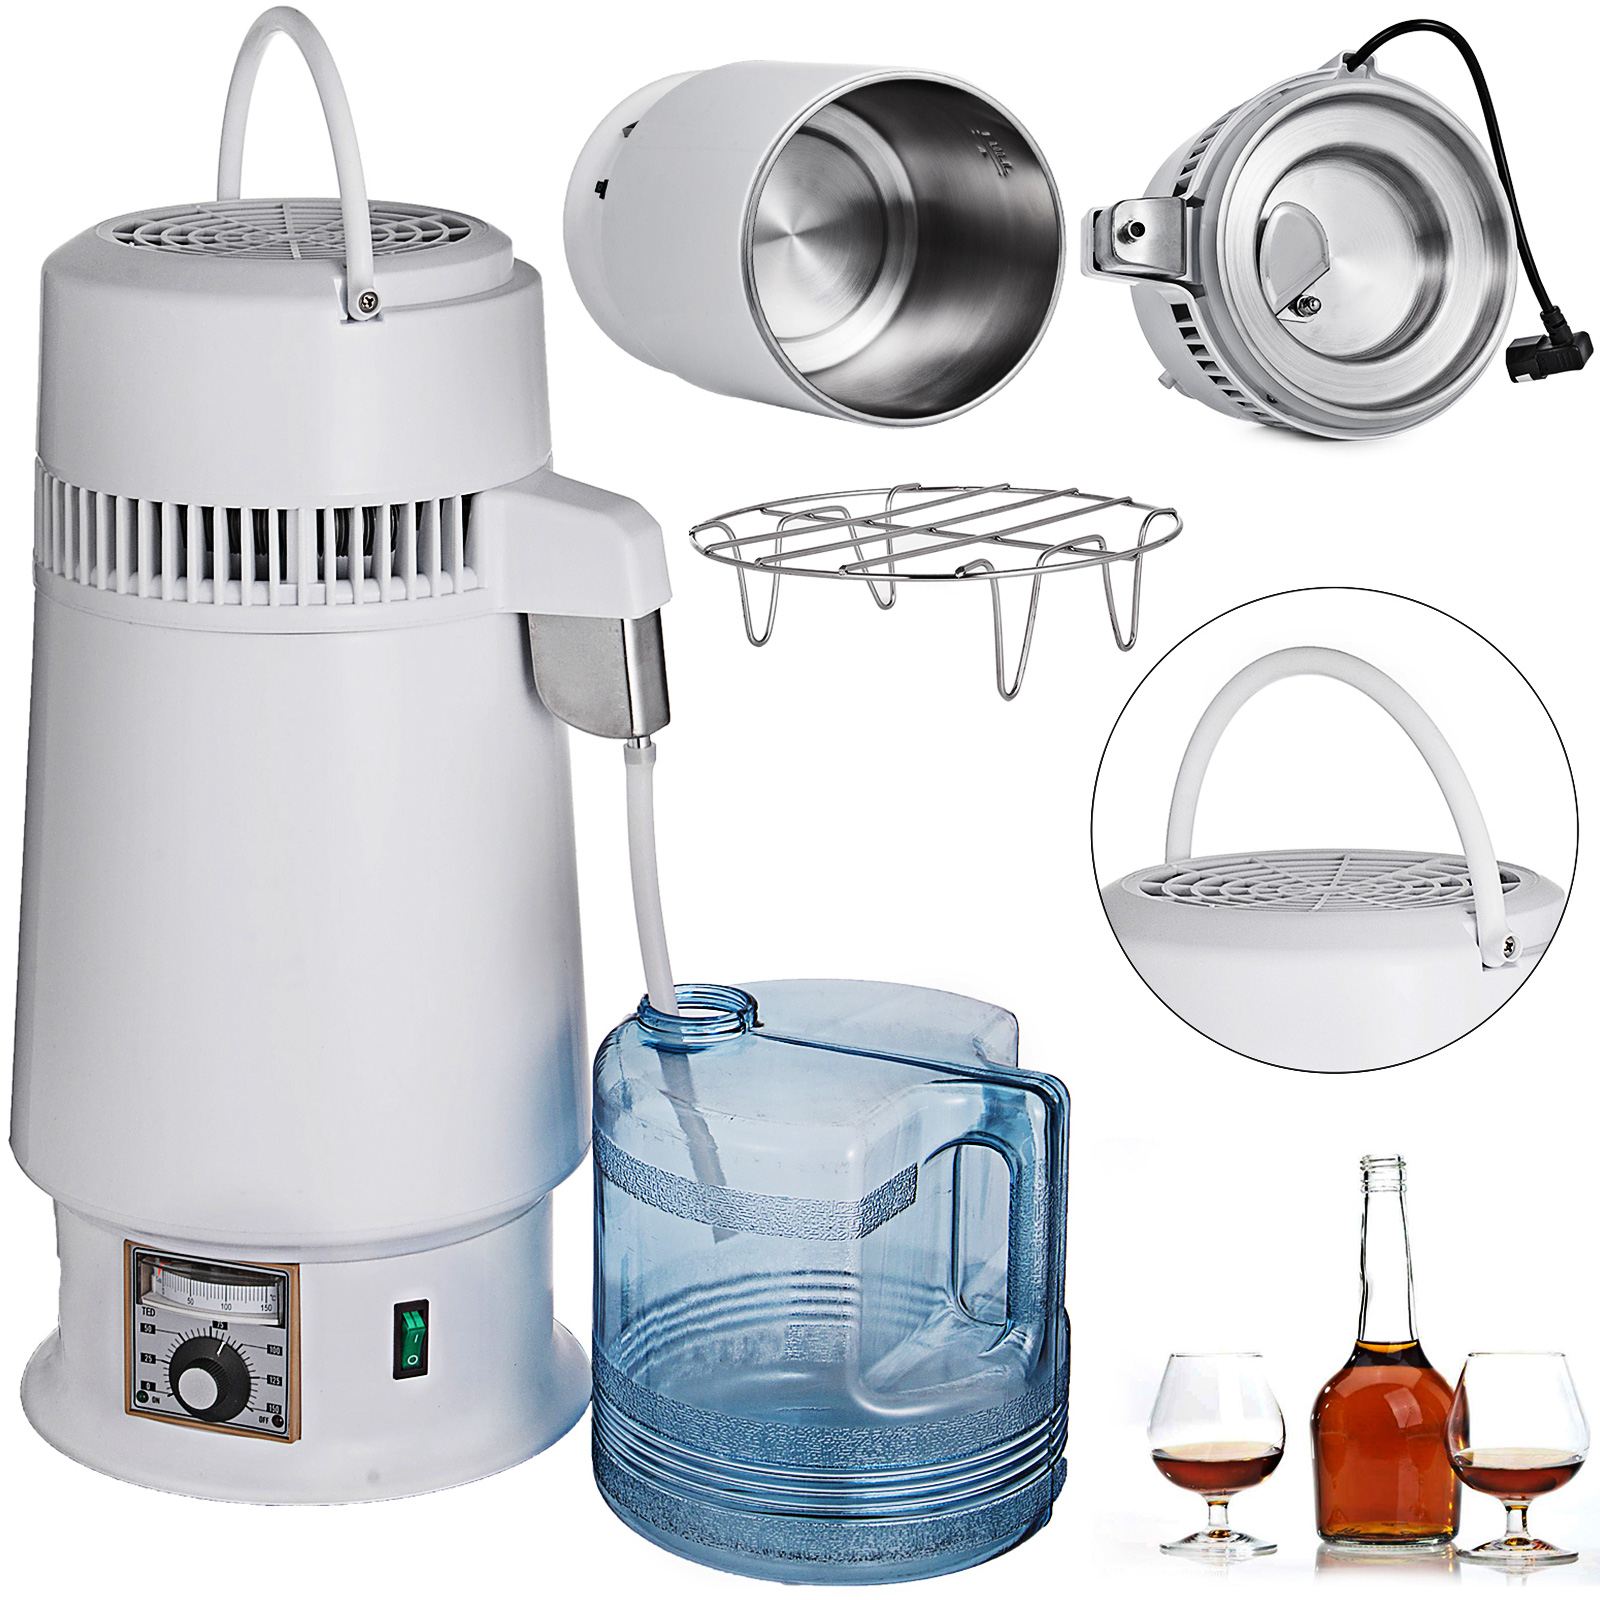 KITGARN Stainless Steel Water Distiller 750W Silver Water Distillation Kit 1.1 Gallon/4 L Water Distiller for Home Countertop with Connection Bottle 4L 750W Silver 